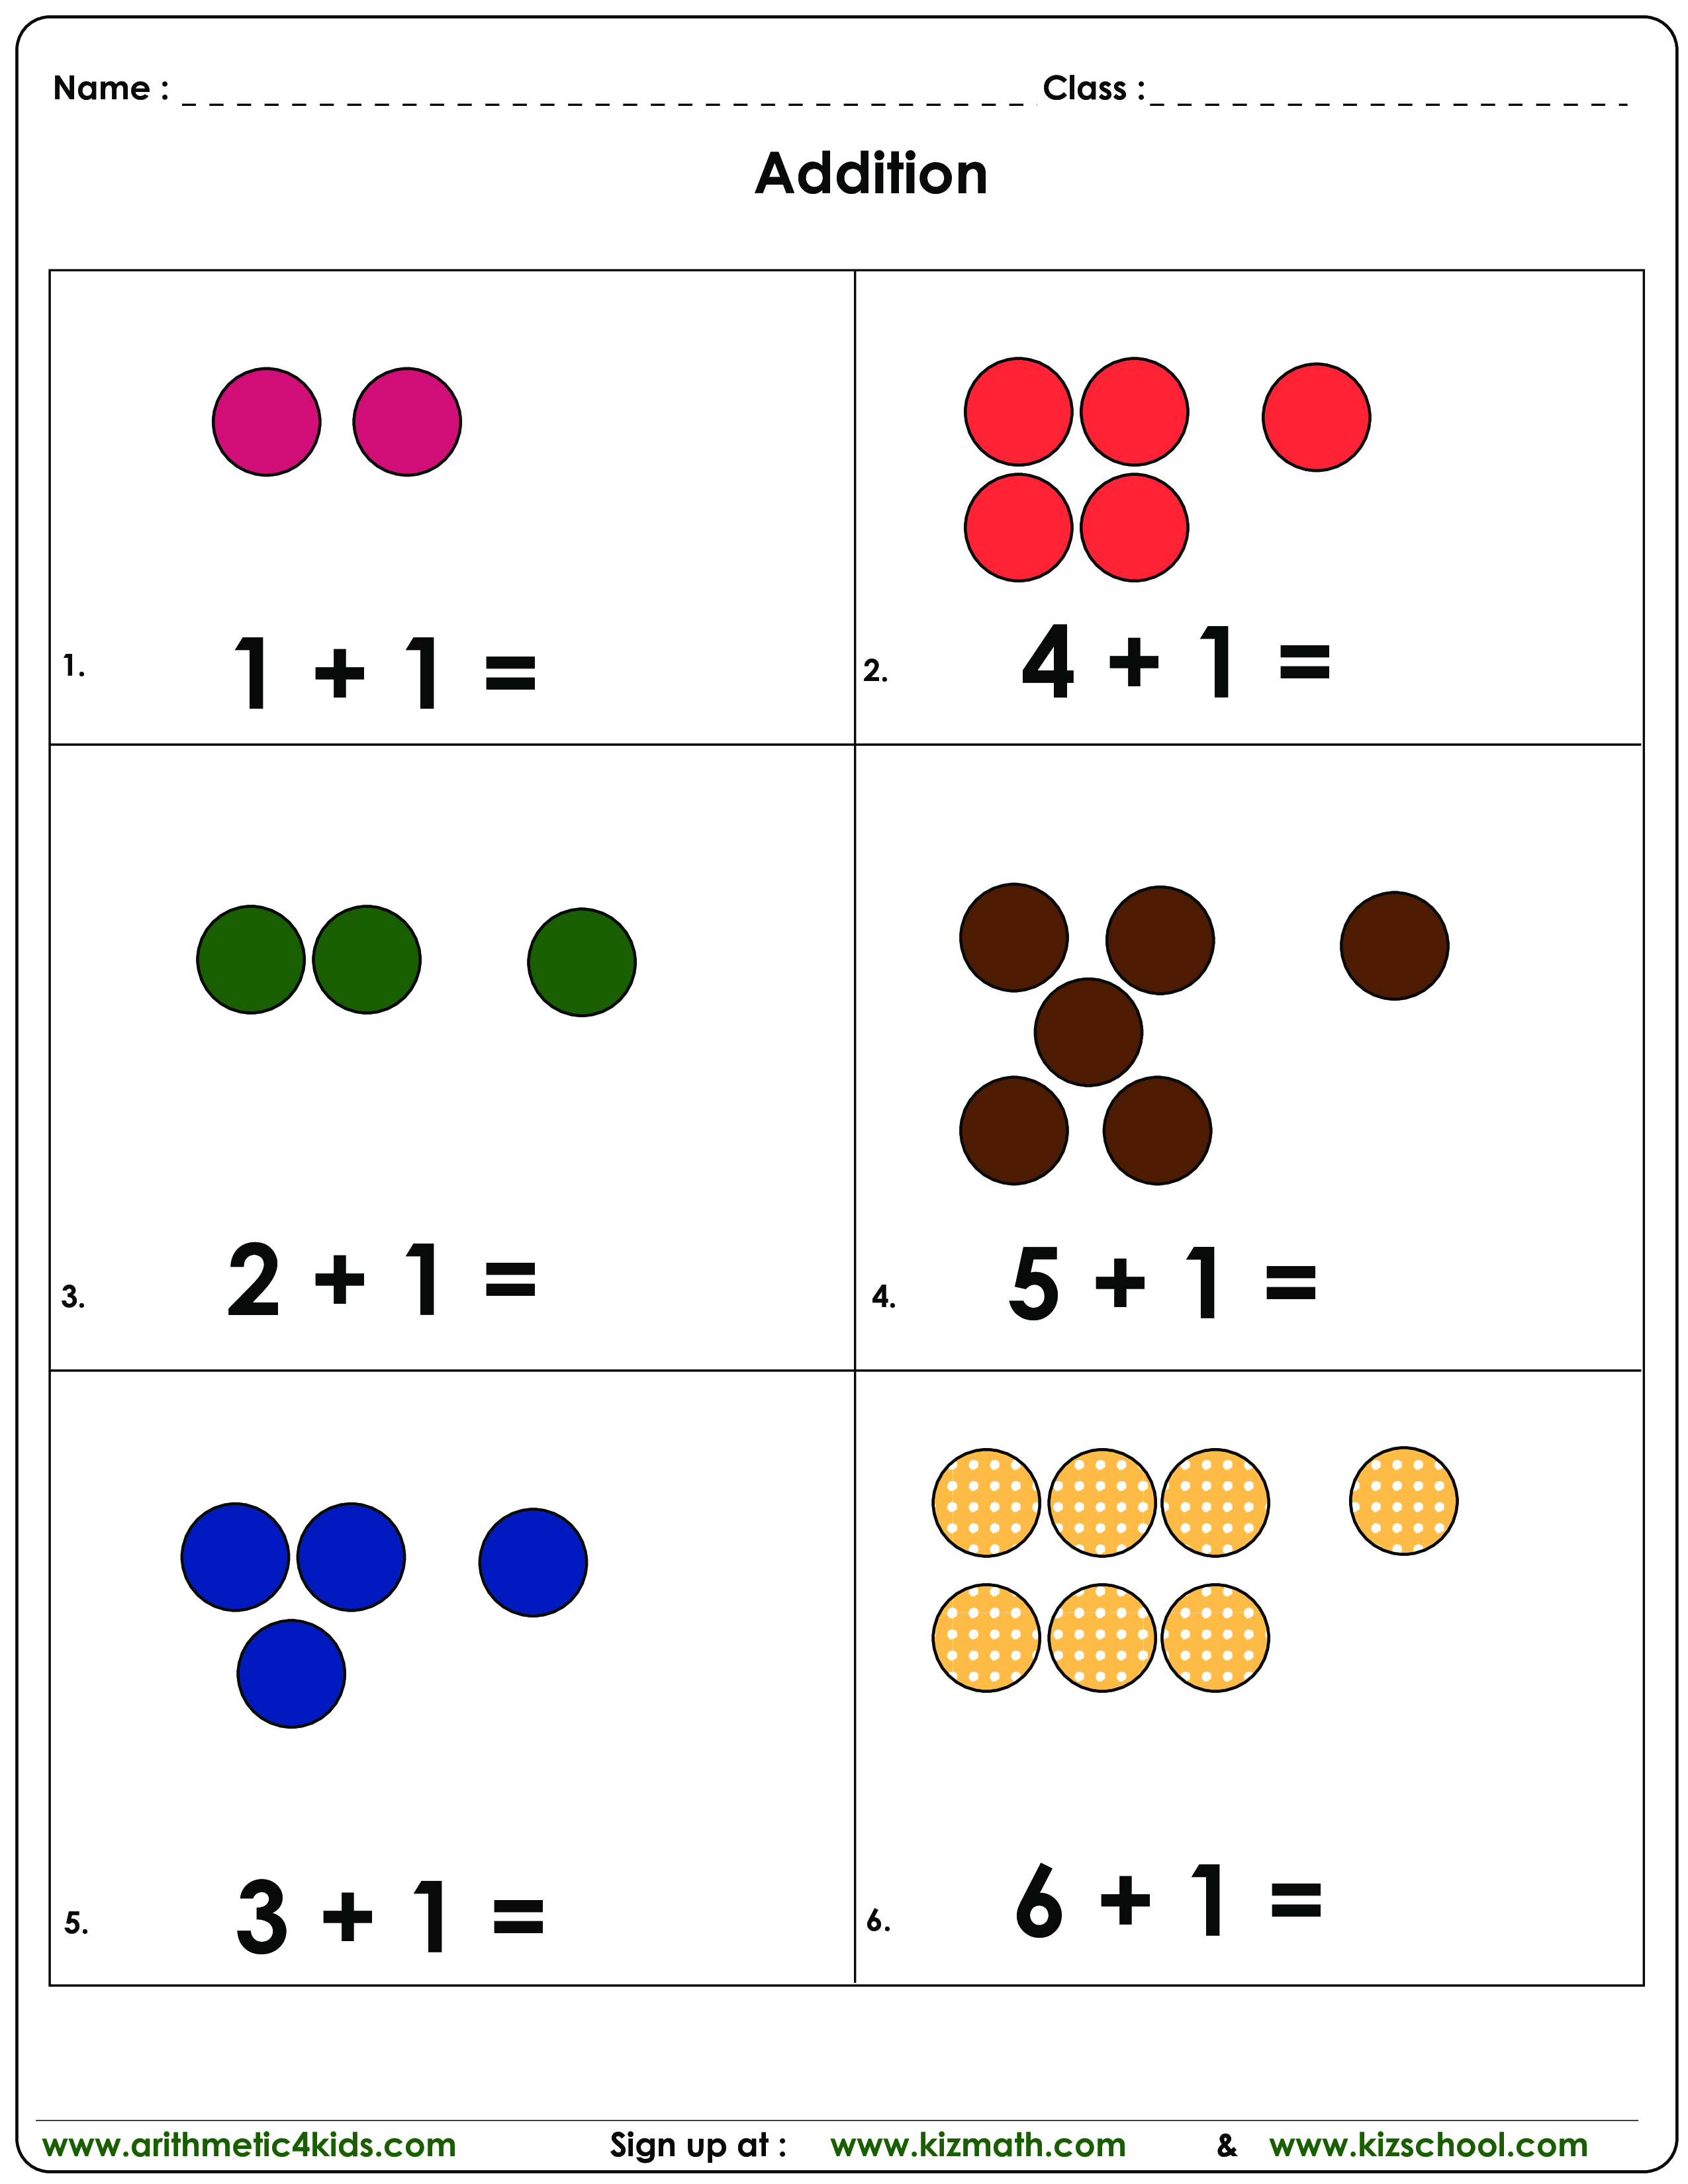 add 1 to other numbers up to 6 with dots plantilla imagen principal